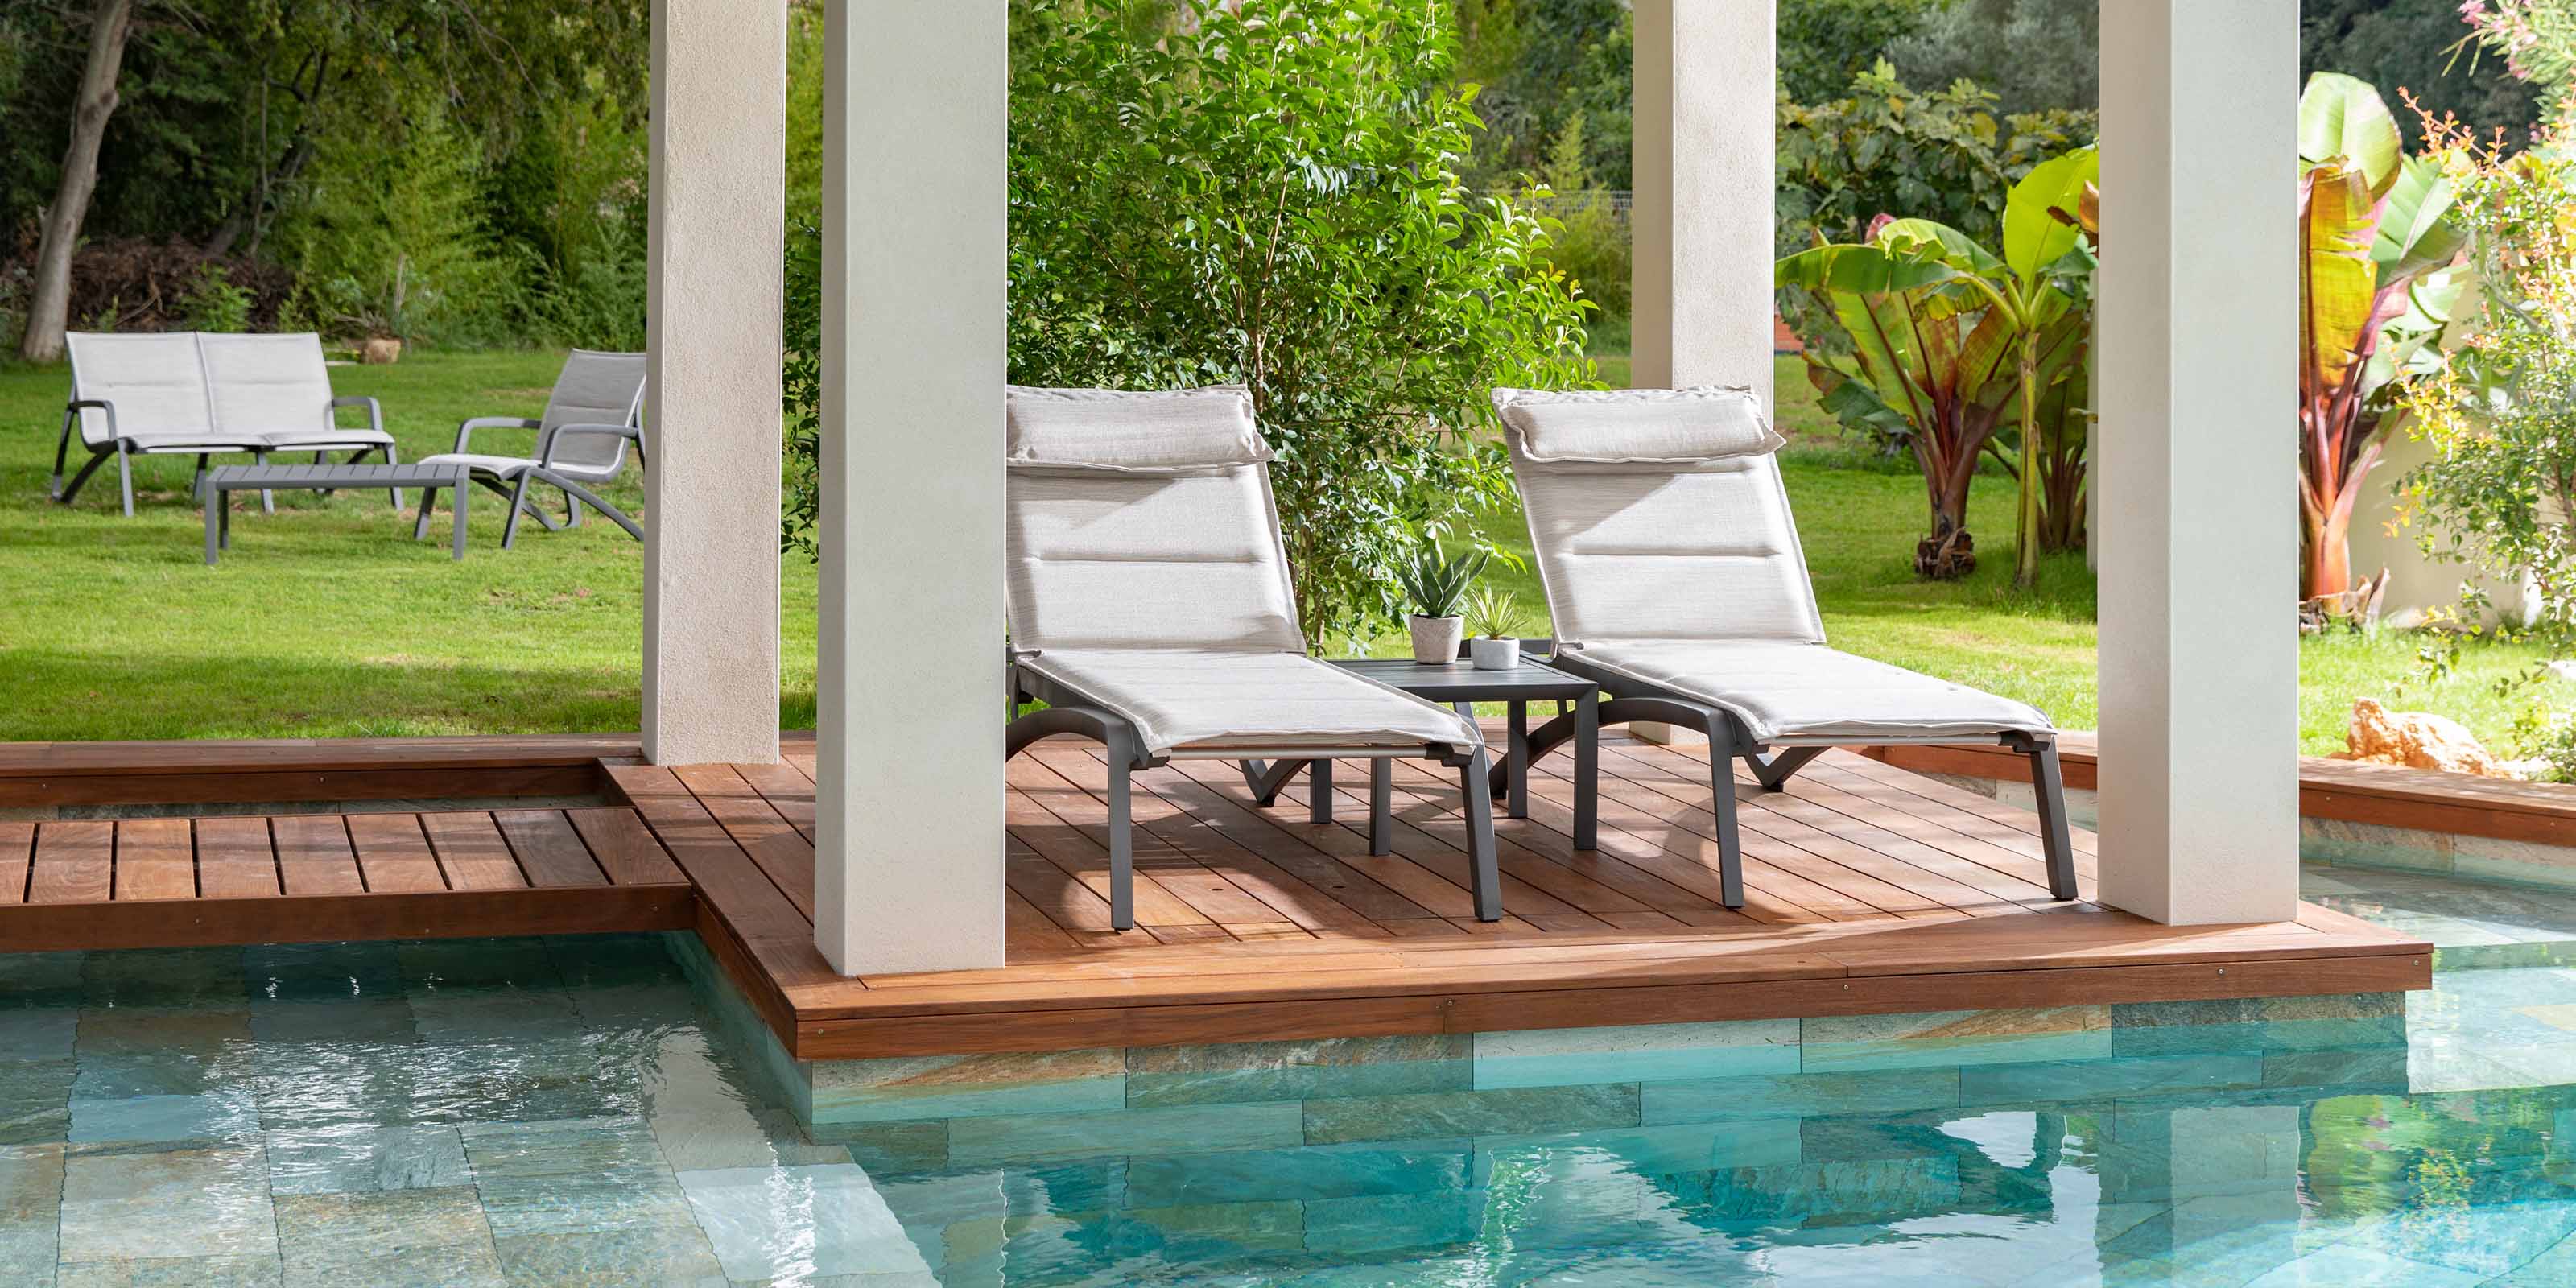 Capture the essence of tranquility in this poolside scene featuring a collection of stylish chaises and lounge chairs, including the inviting Sunset Comfort Chaise. As the sun sets, bask in the serene glow of comfort and elegance.